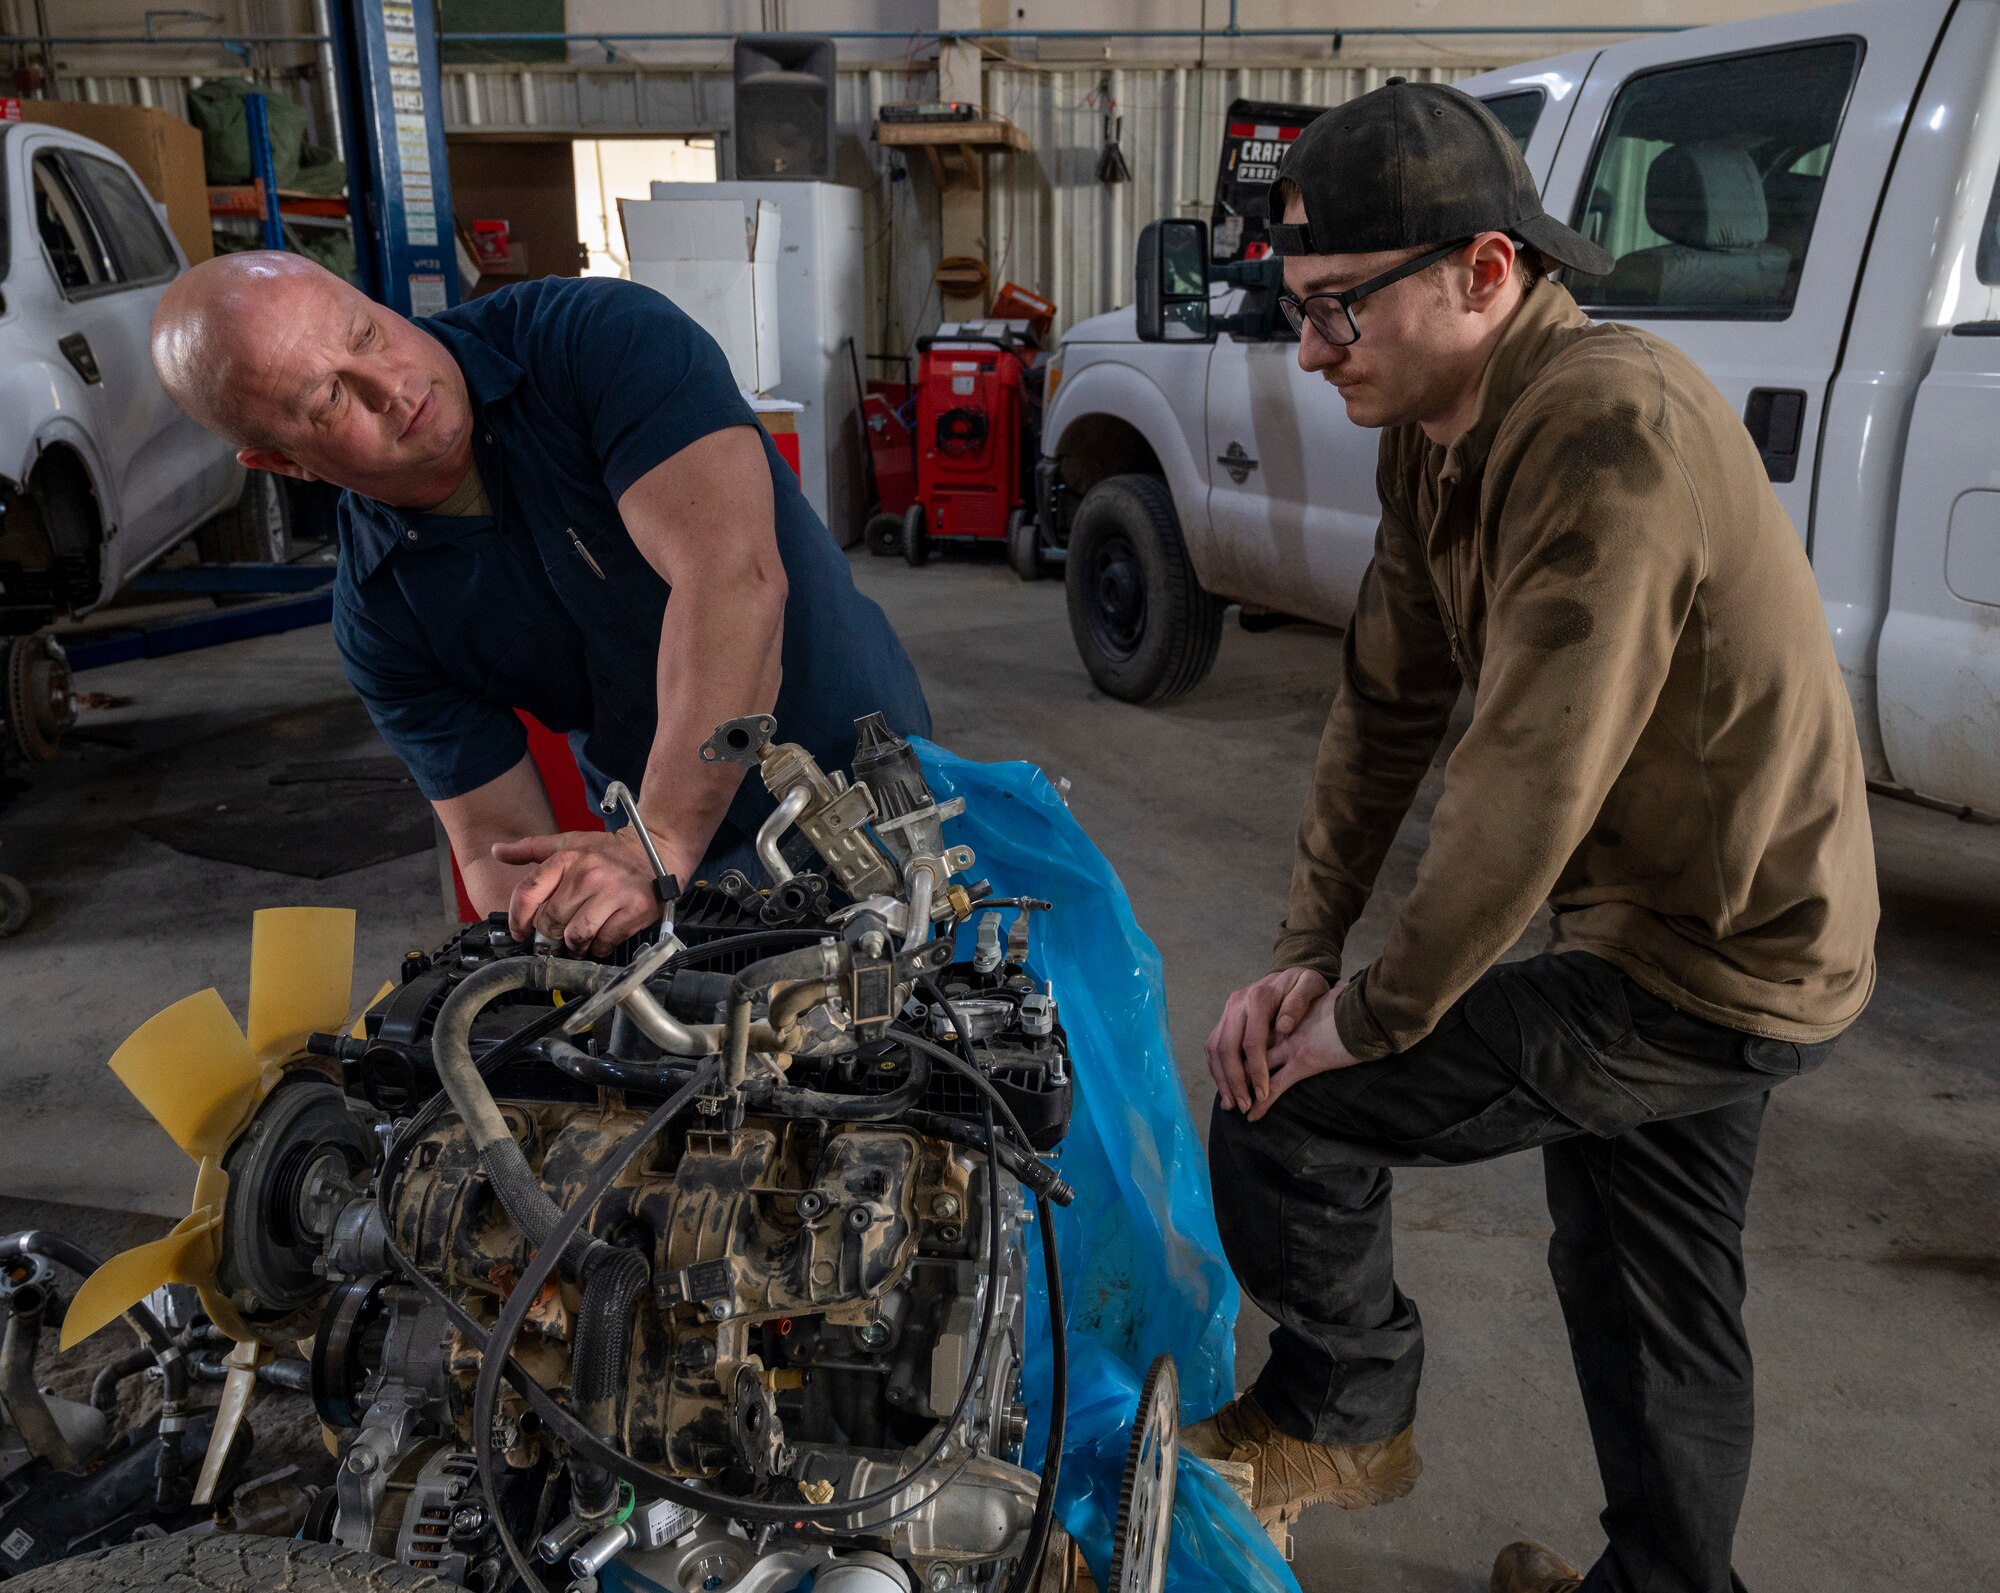 U.S. Air Force Airman 1st Class William Glendenning, Right, and U.S. Air Force Tech Sgt. Jeffery Burch, Left, 386th Expeditionary Logistics Readiness Squadron vehicle management specialists, fix an engine at Ali Al Salem Air Base, Kuwait, March 8, 2023.